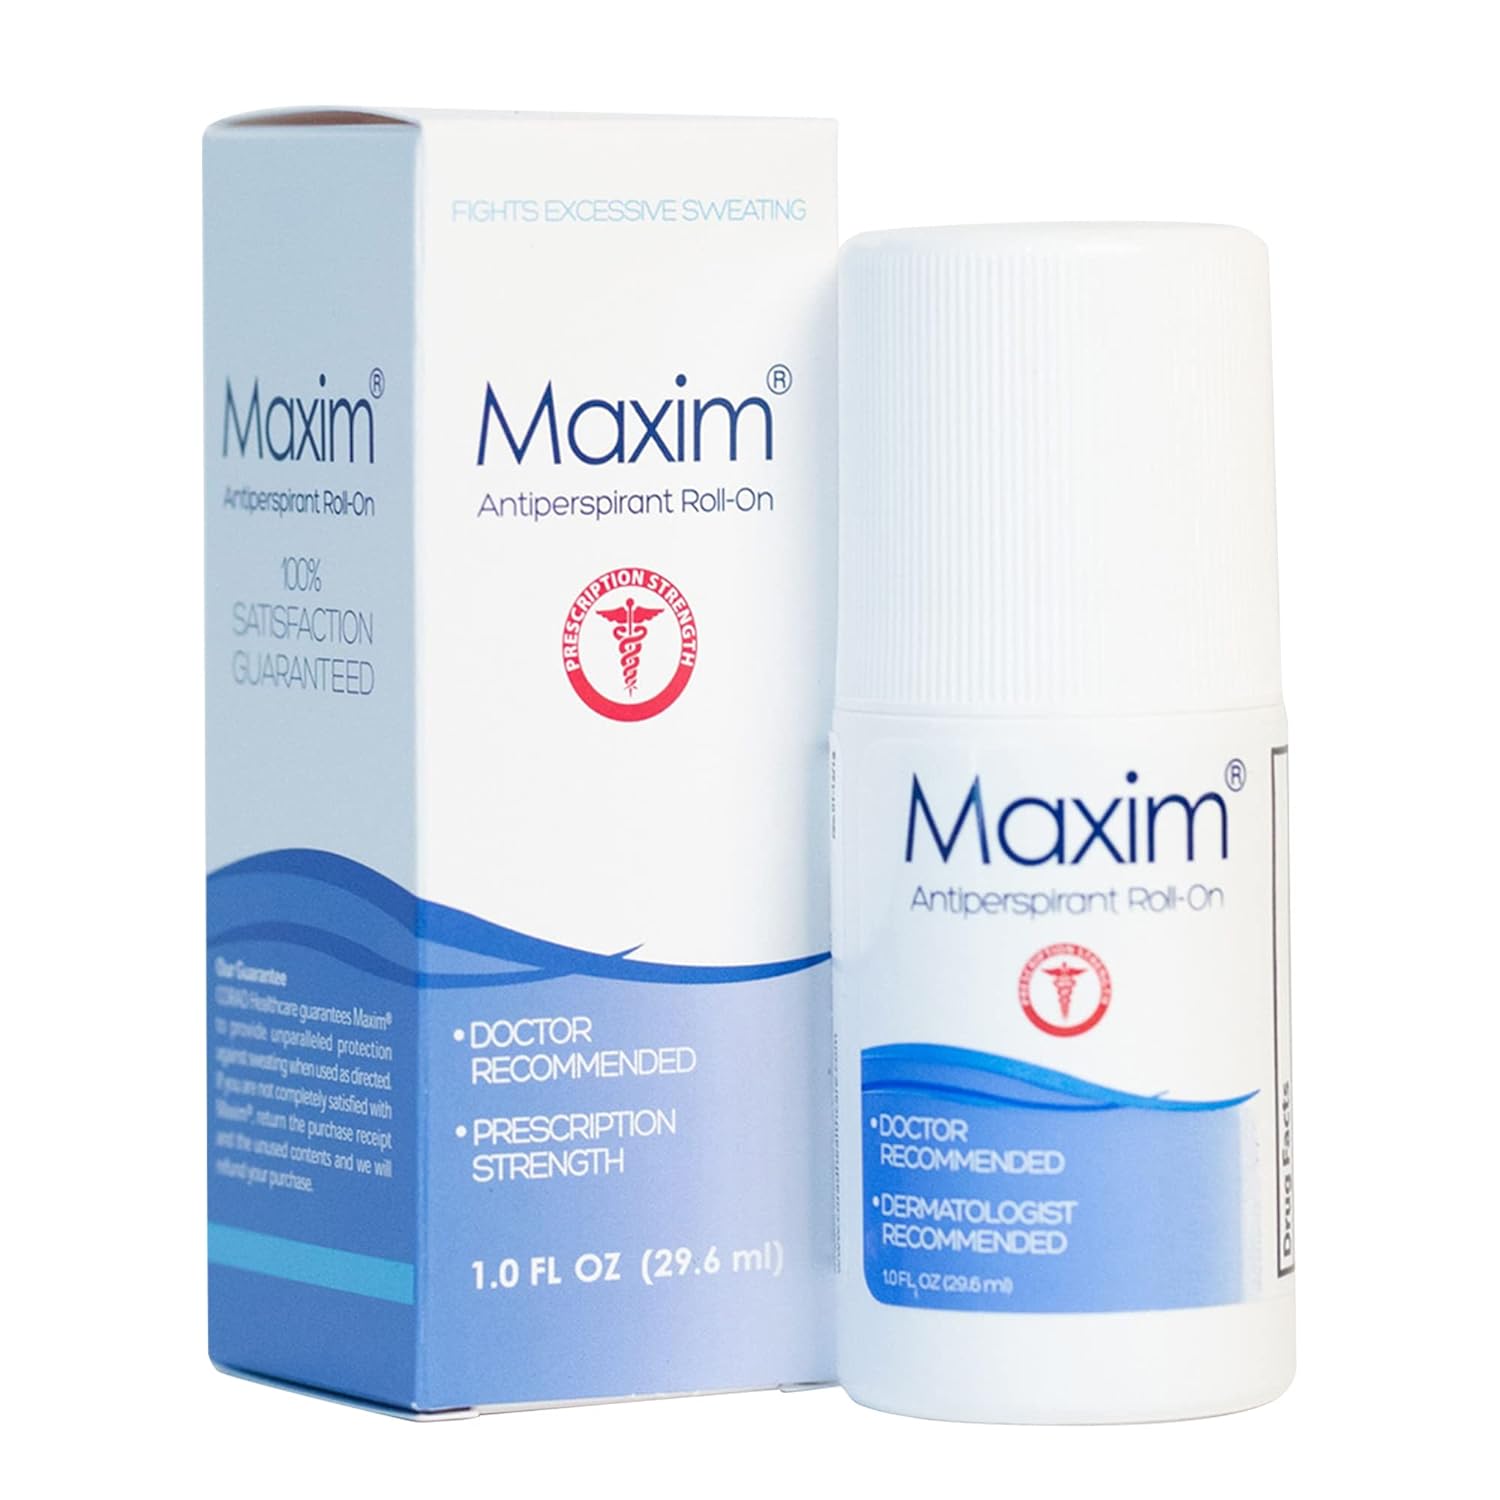 Maxim® Clinical Strength Antiperspirant for hyperhidrosis Excessive Sweating – Reduces Sweat Up to 7-days Per Use – Antiperspirant for Men and Women Certain to Keep you Dri!